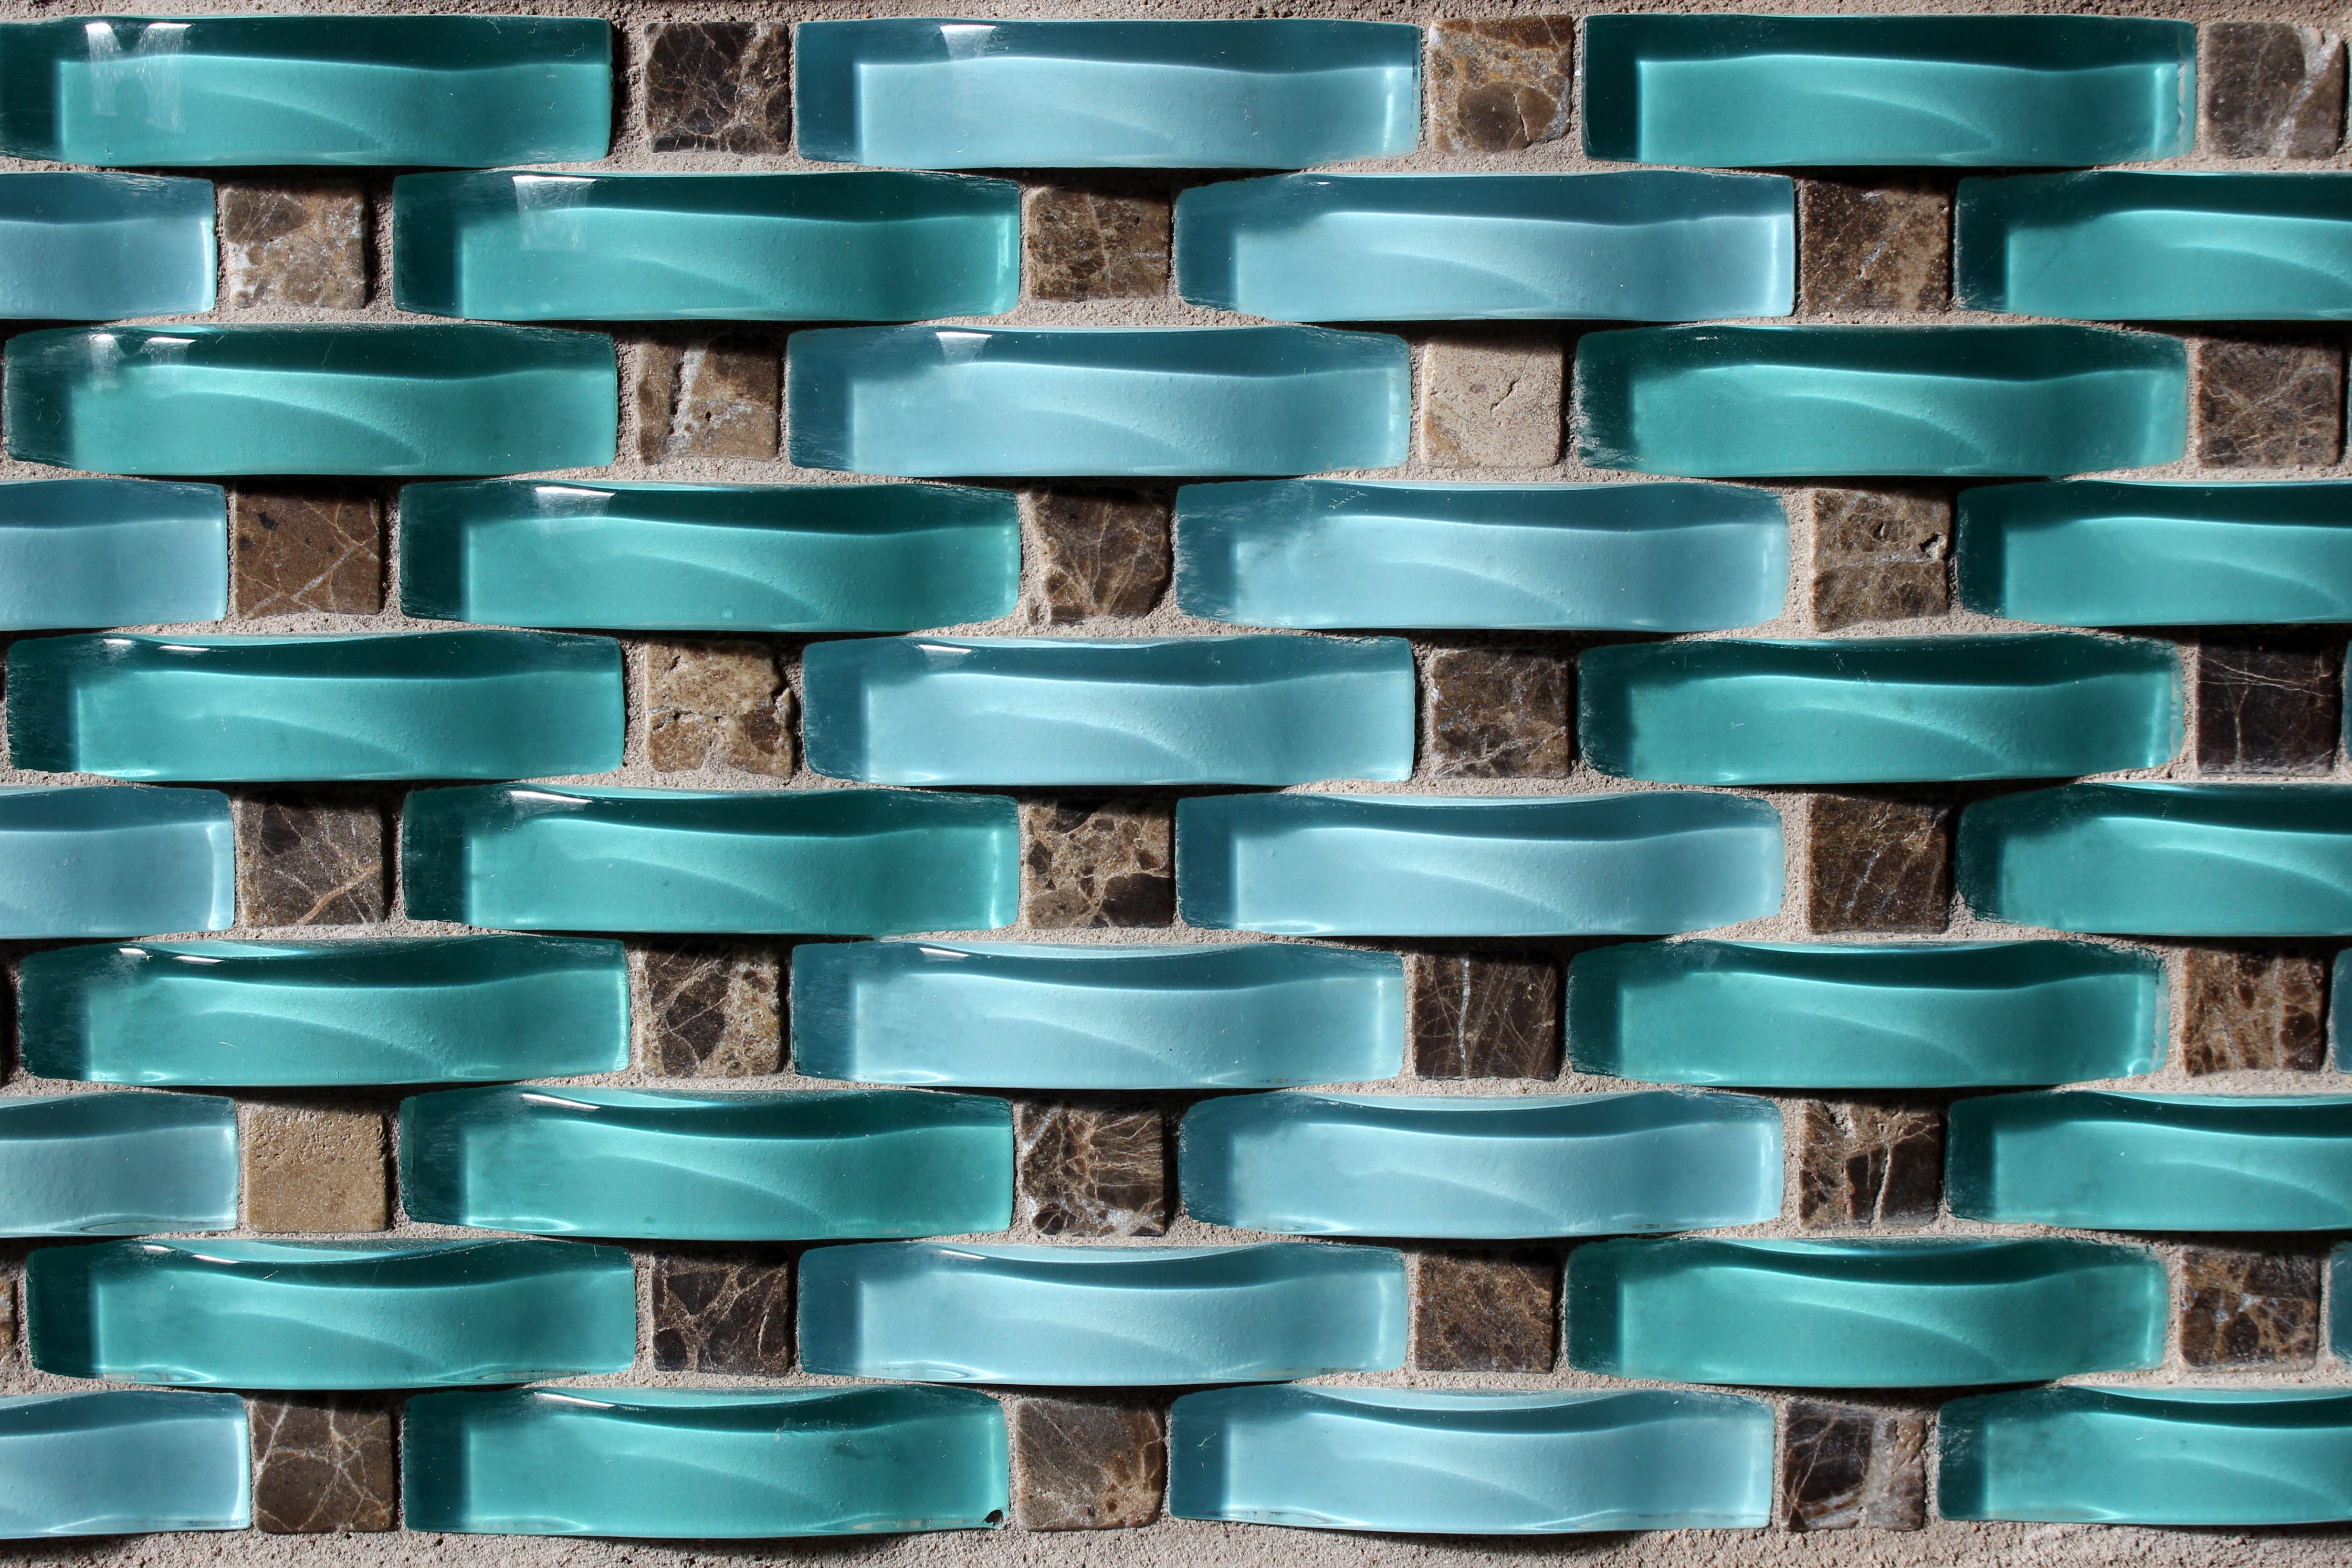 Curved sections of aqua-colored glass set between gray squares of tile-like cement.